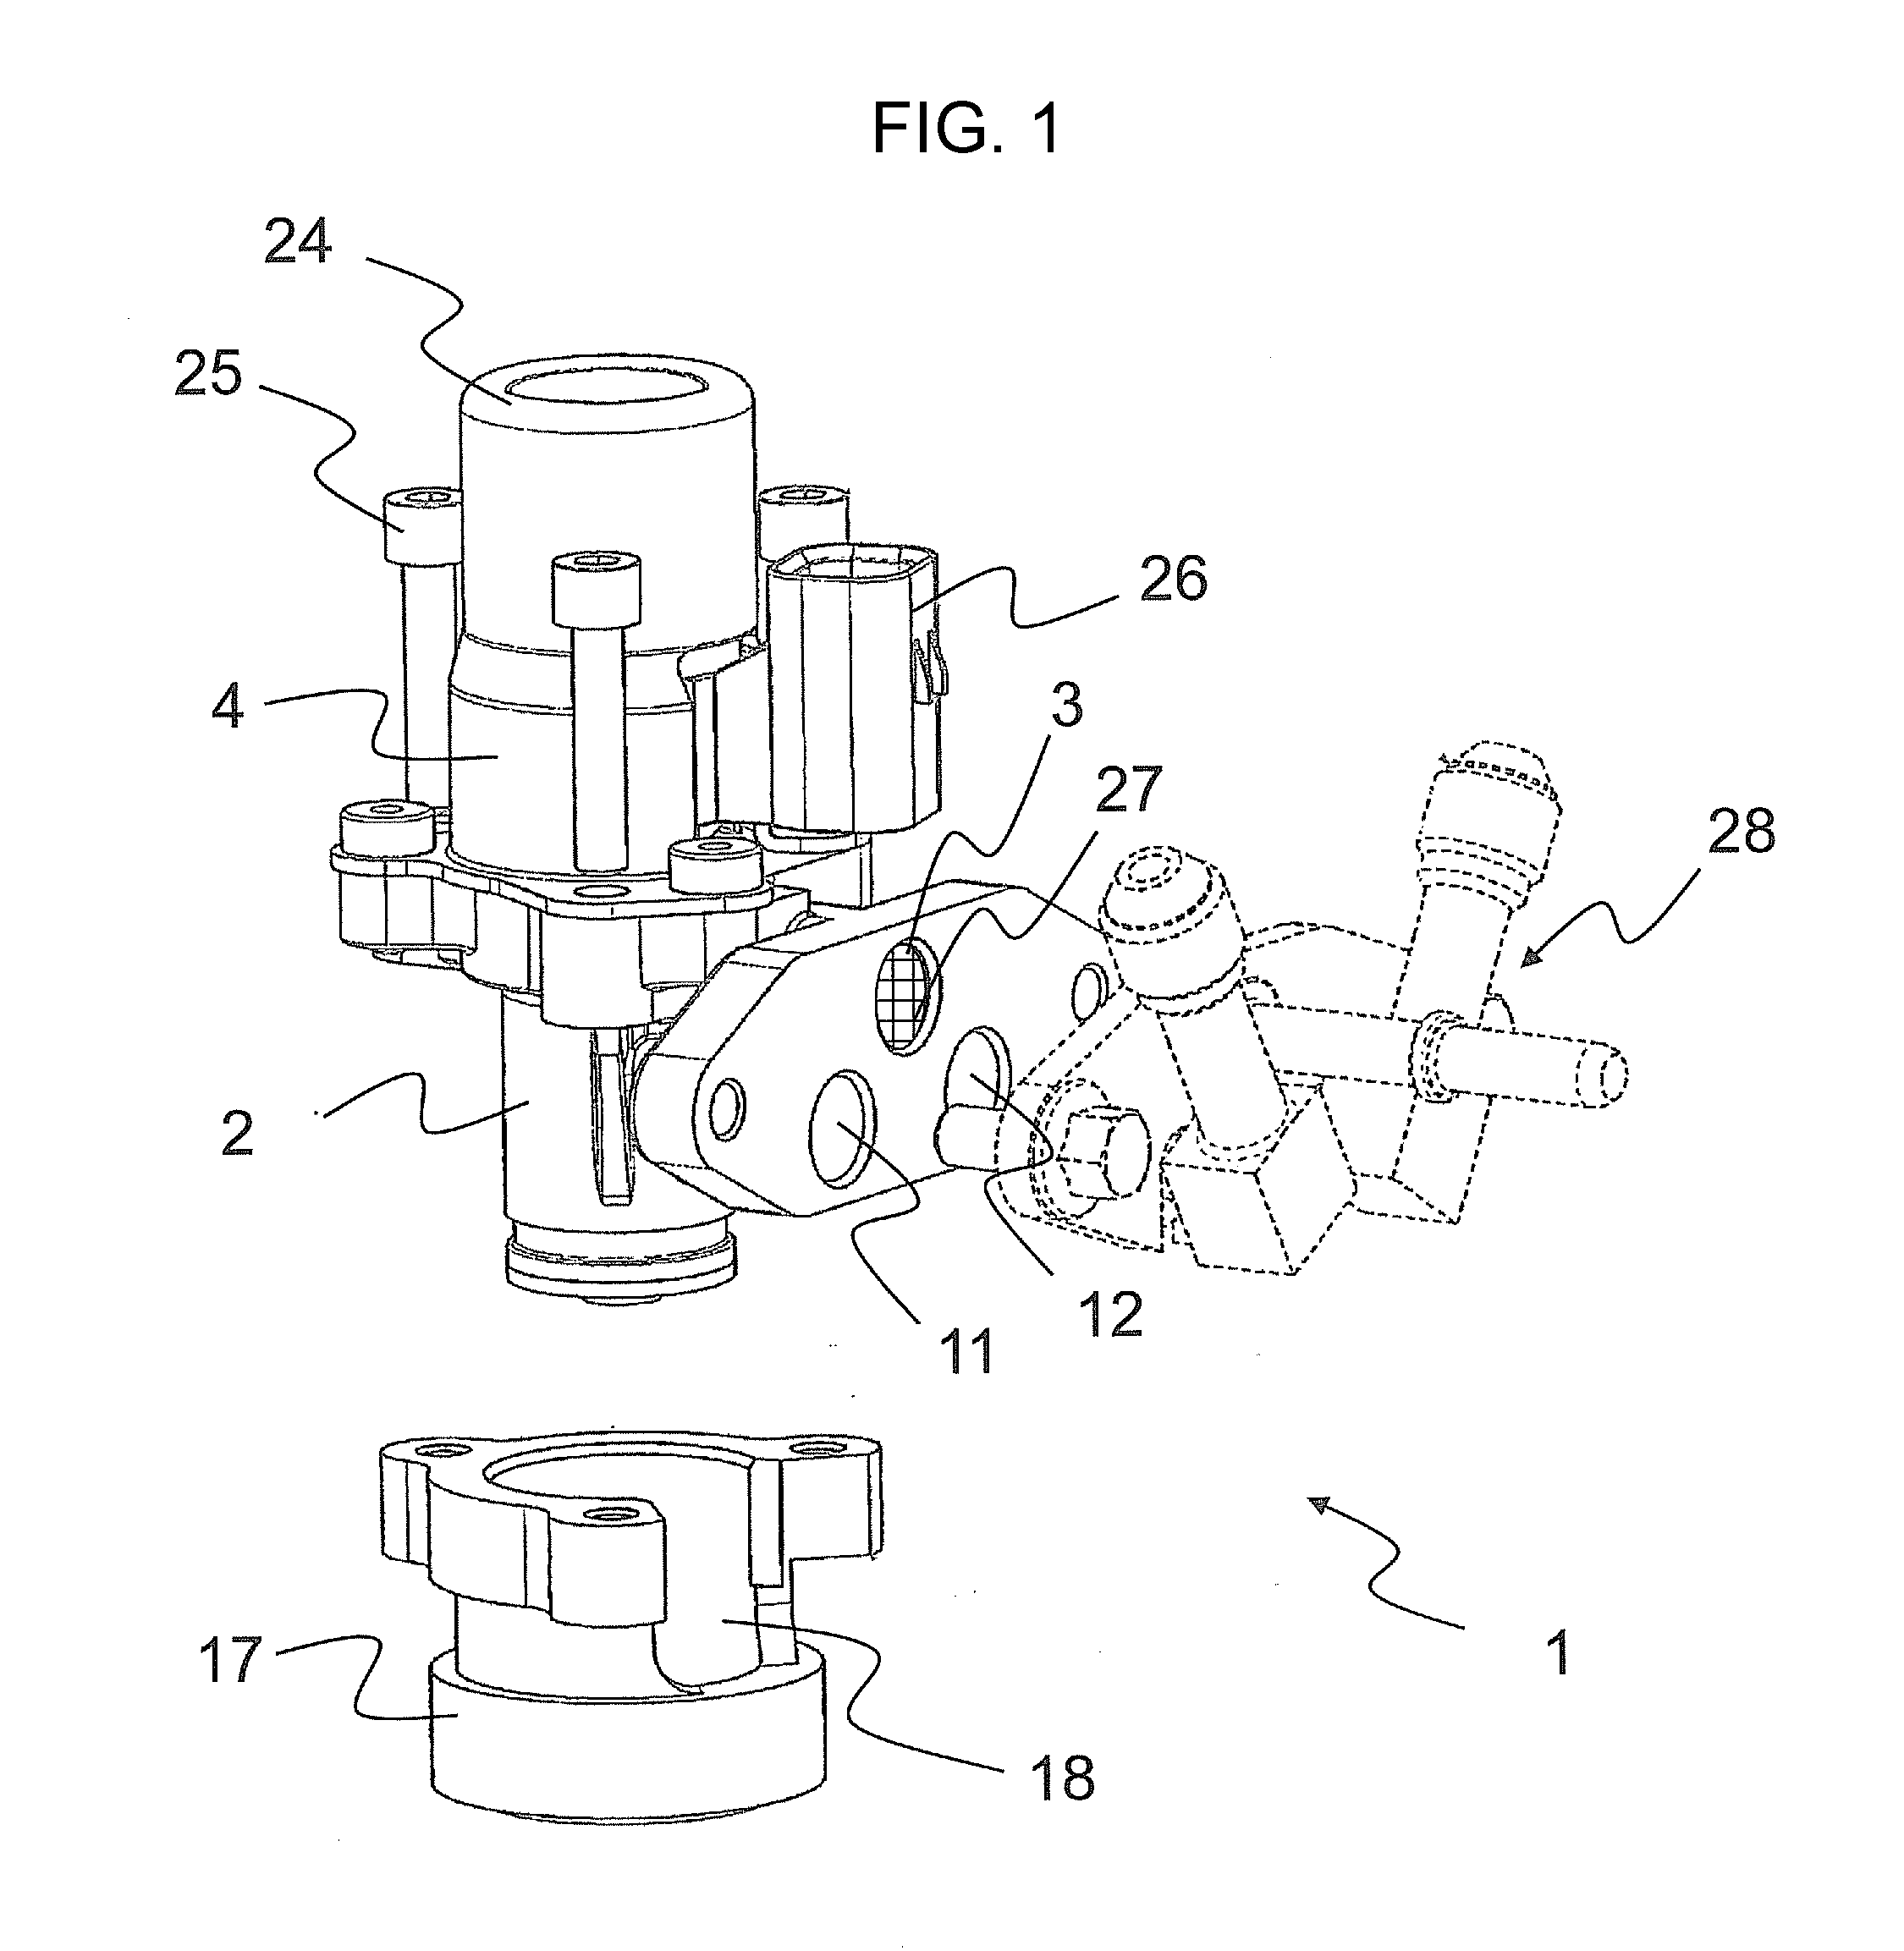 Injector for a urea-water solution